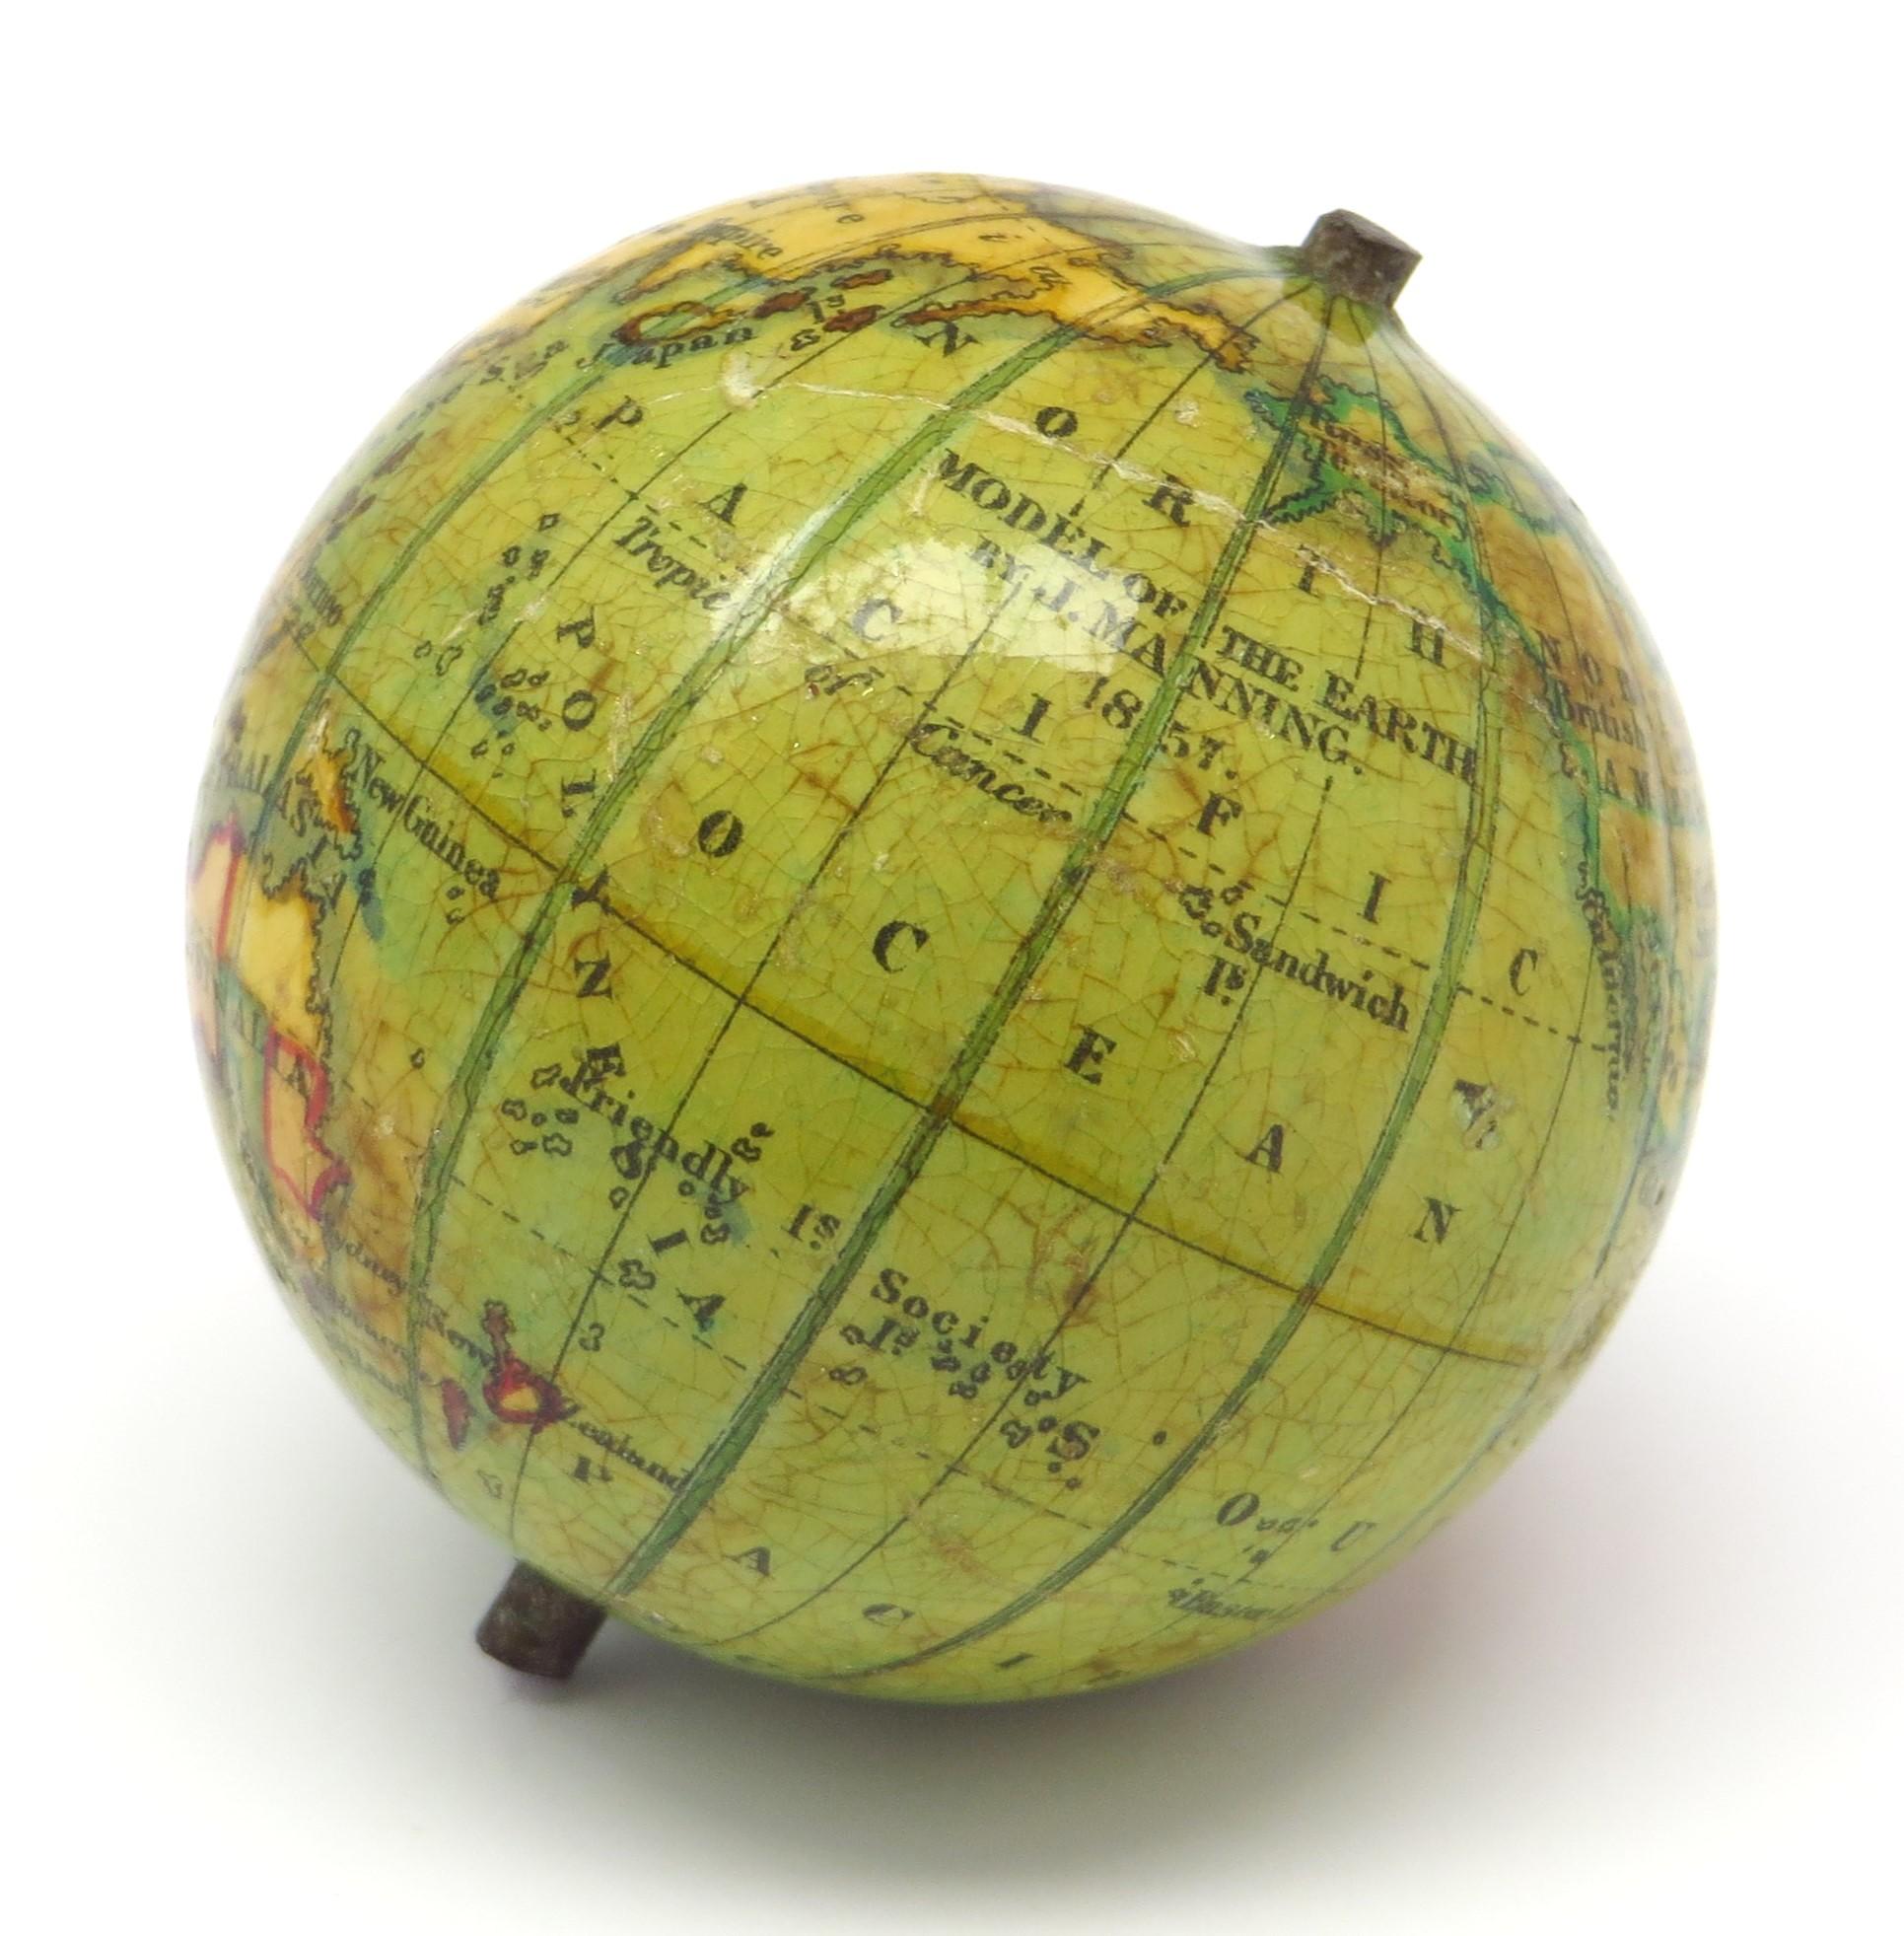 Miniature terrestrial pocket globe. Model of the earth.

London, 1857 by J. Manning
diameter of 1,75 inches / 4,5 cm.

This lovely miniature terrestrial globe consists of twelve copper engraved, hand coloured gores over a wooden base. The gores are